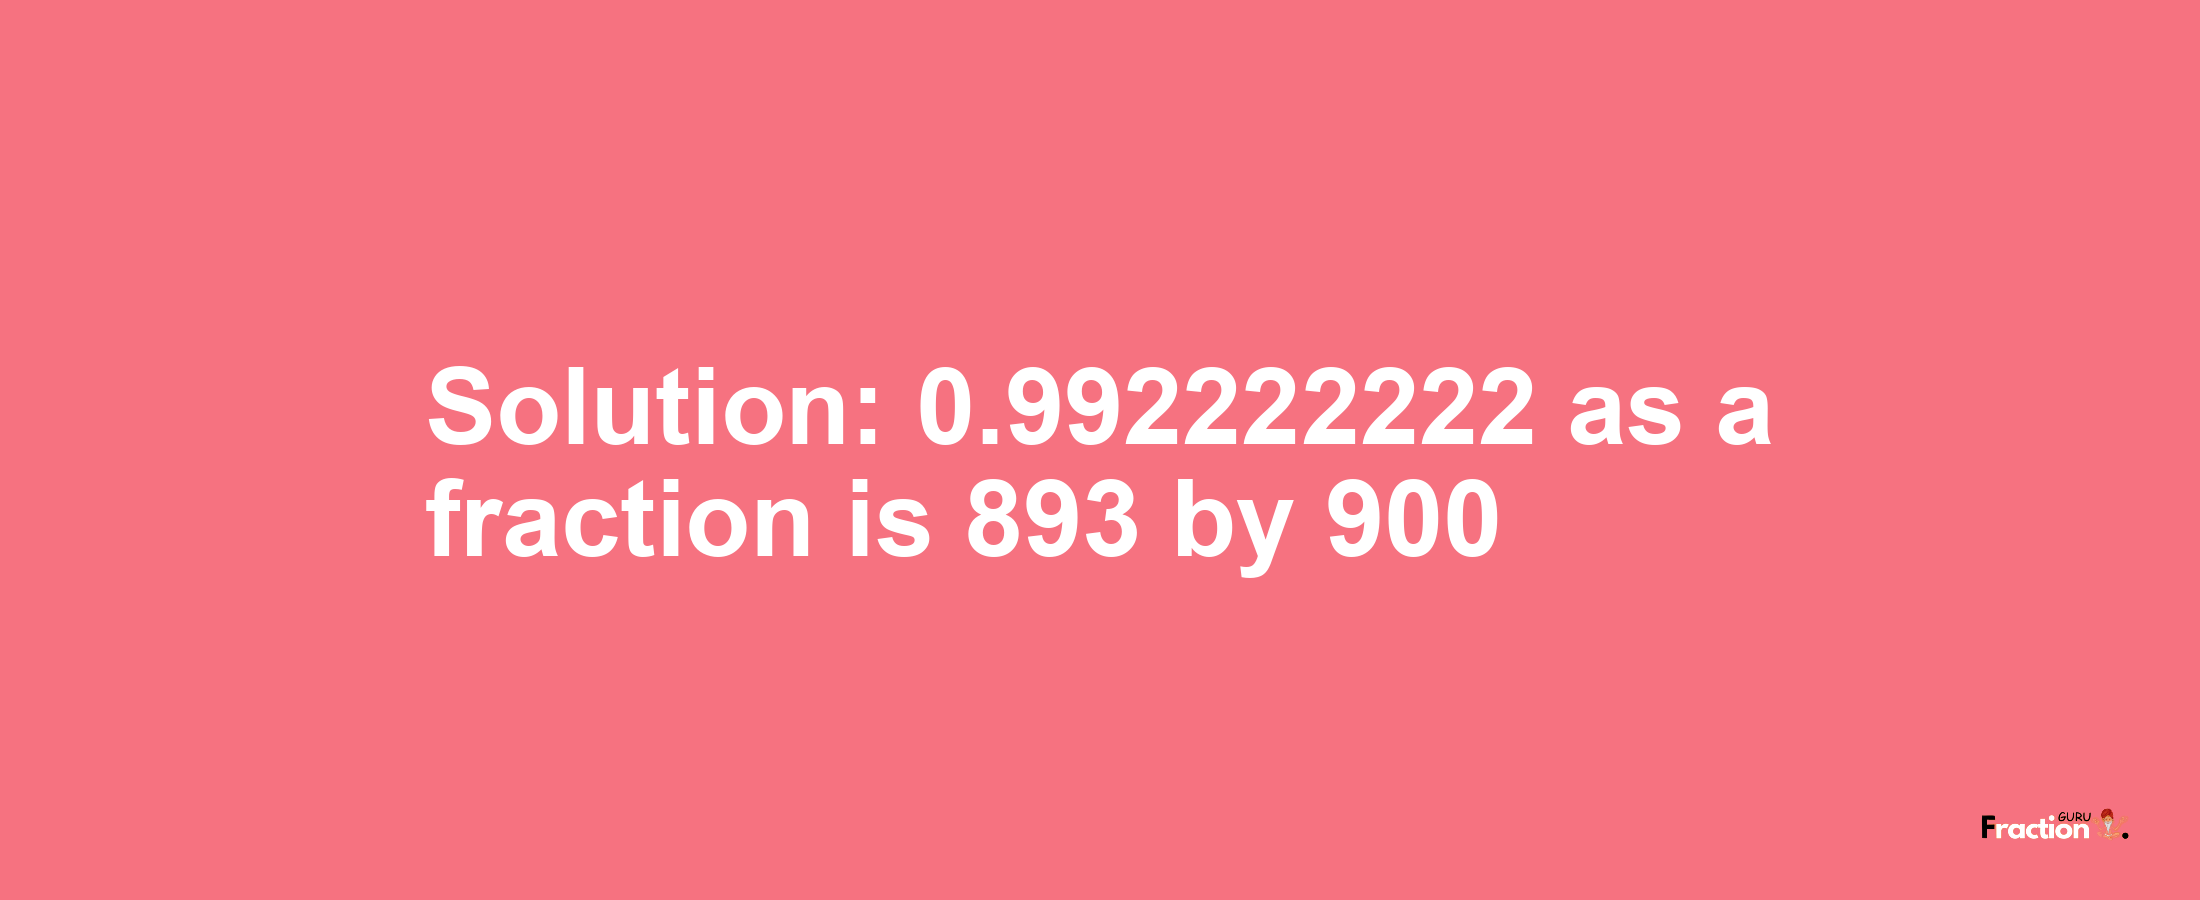 Solution:0.992222222 as a fraction is 893/900